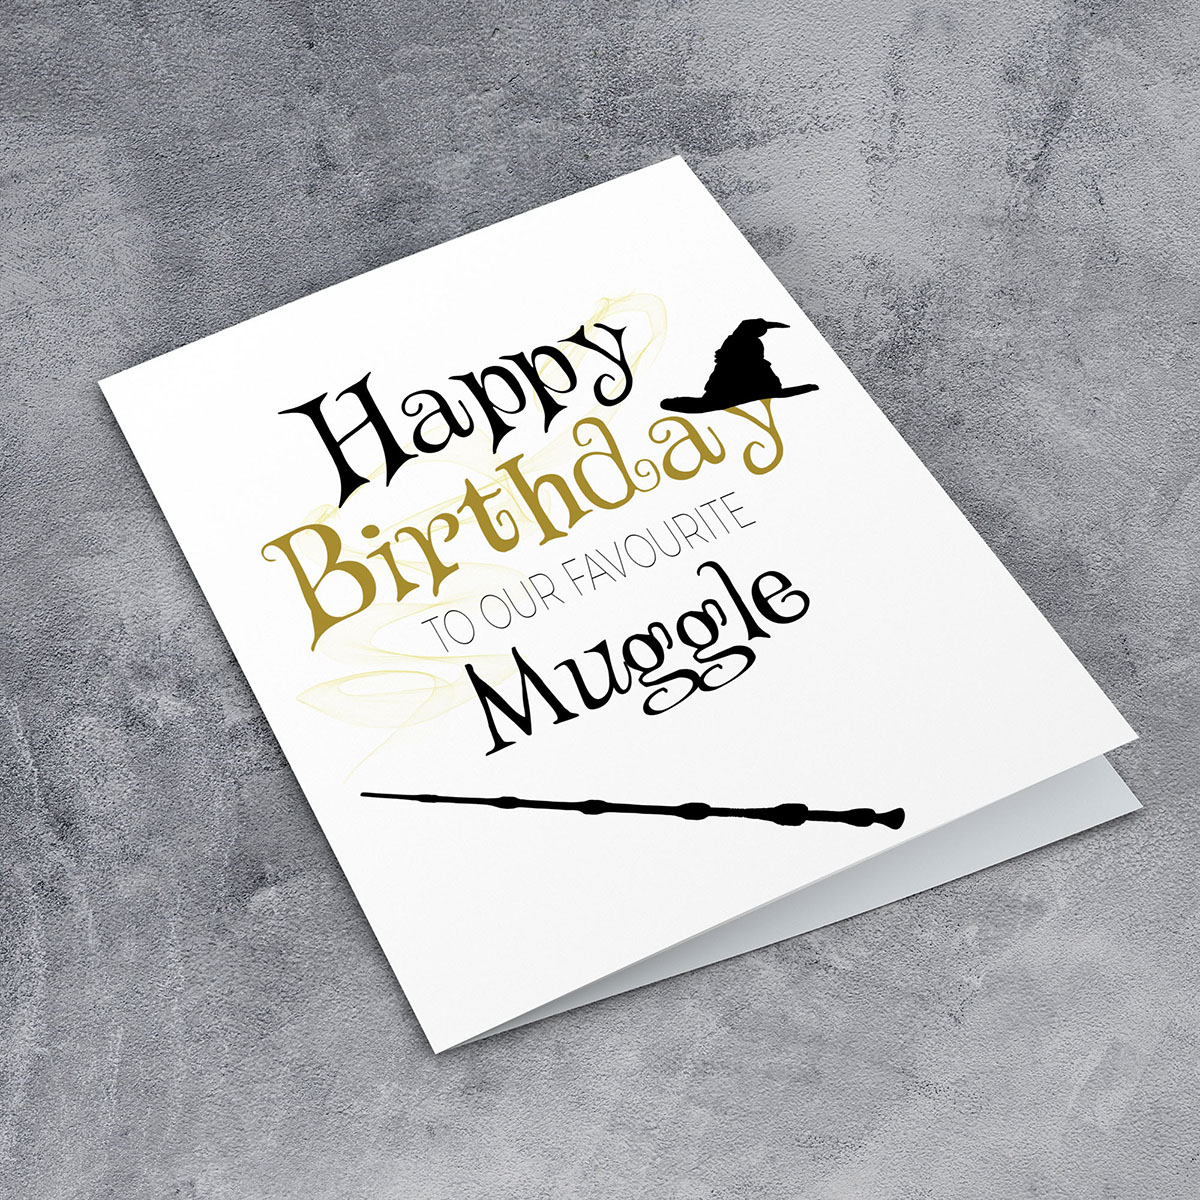 Harry Potter To Our Favourite Muggle Card - Pink Tag Prints